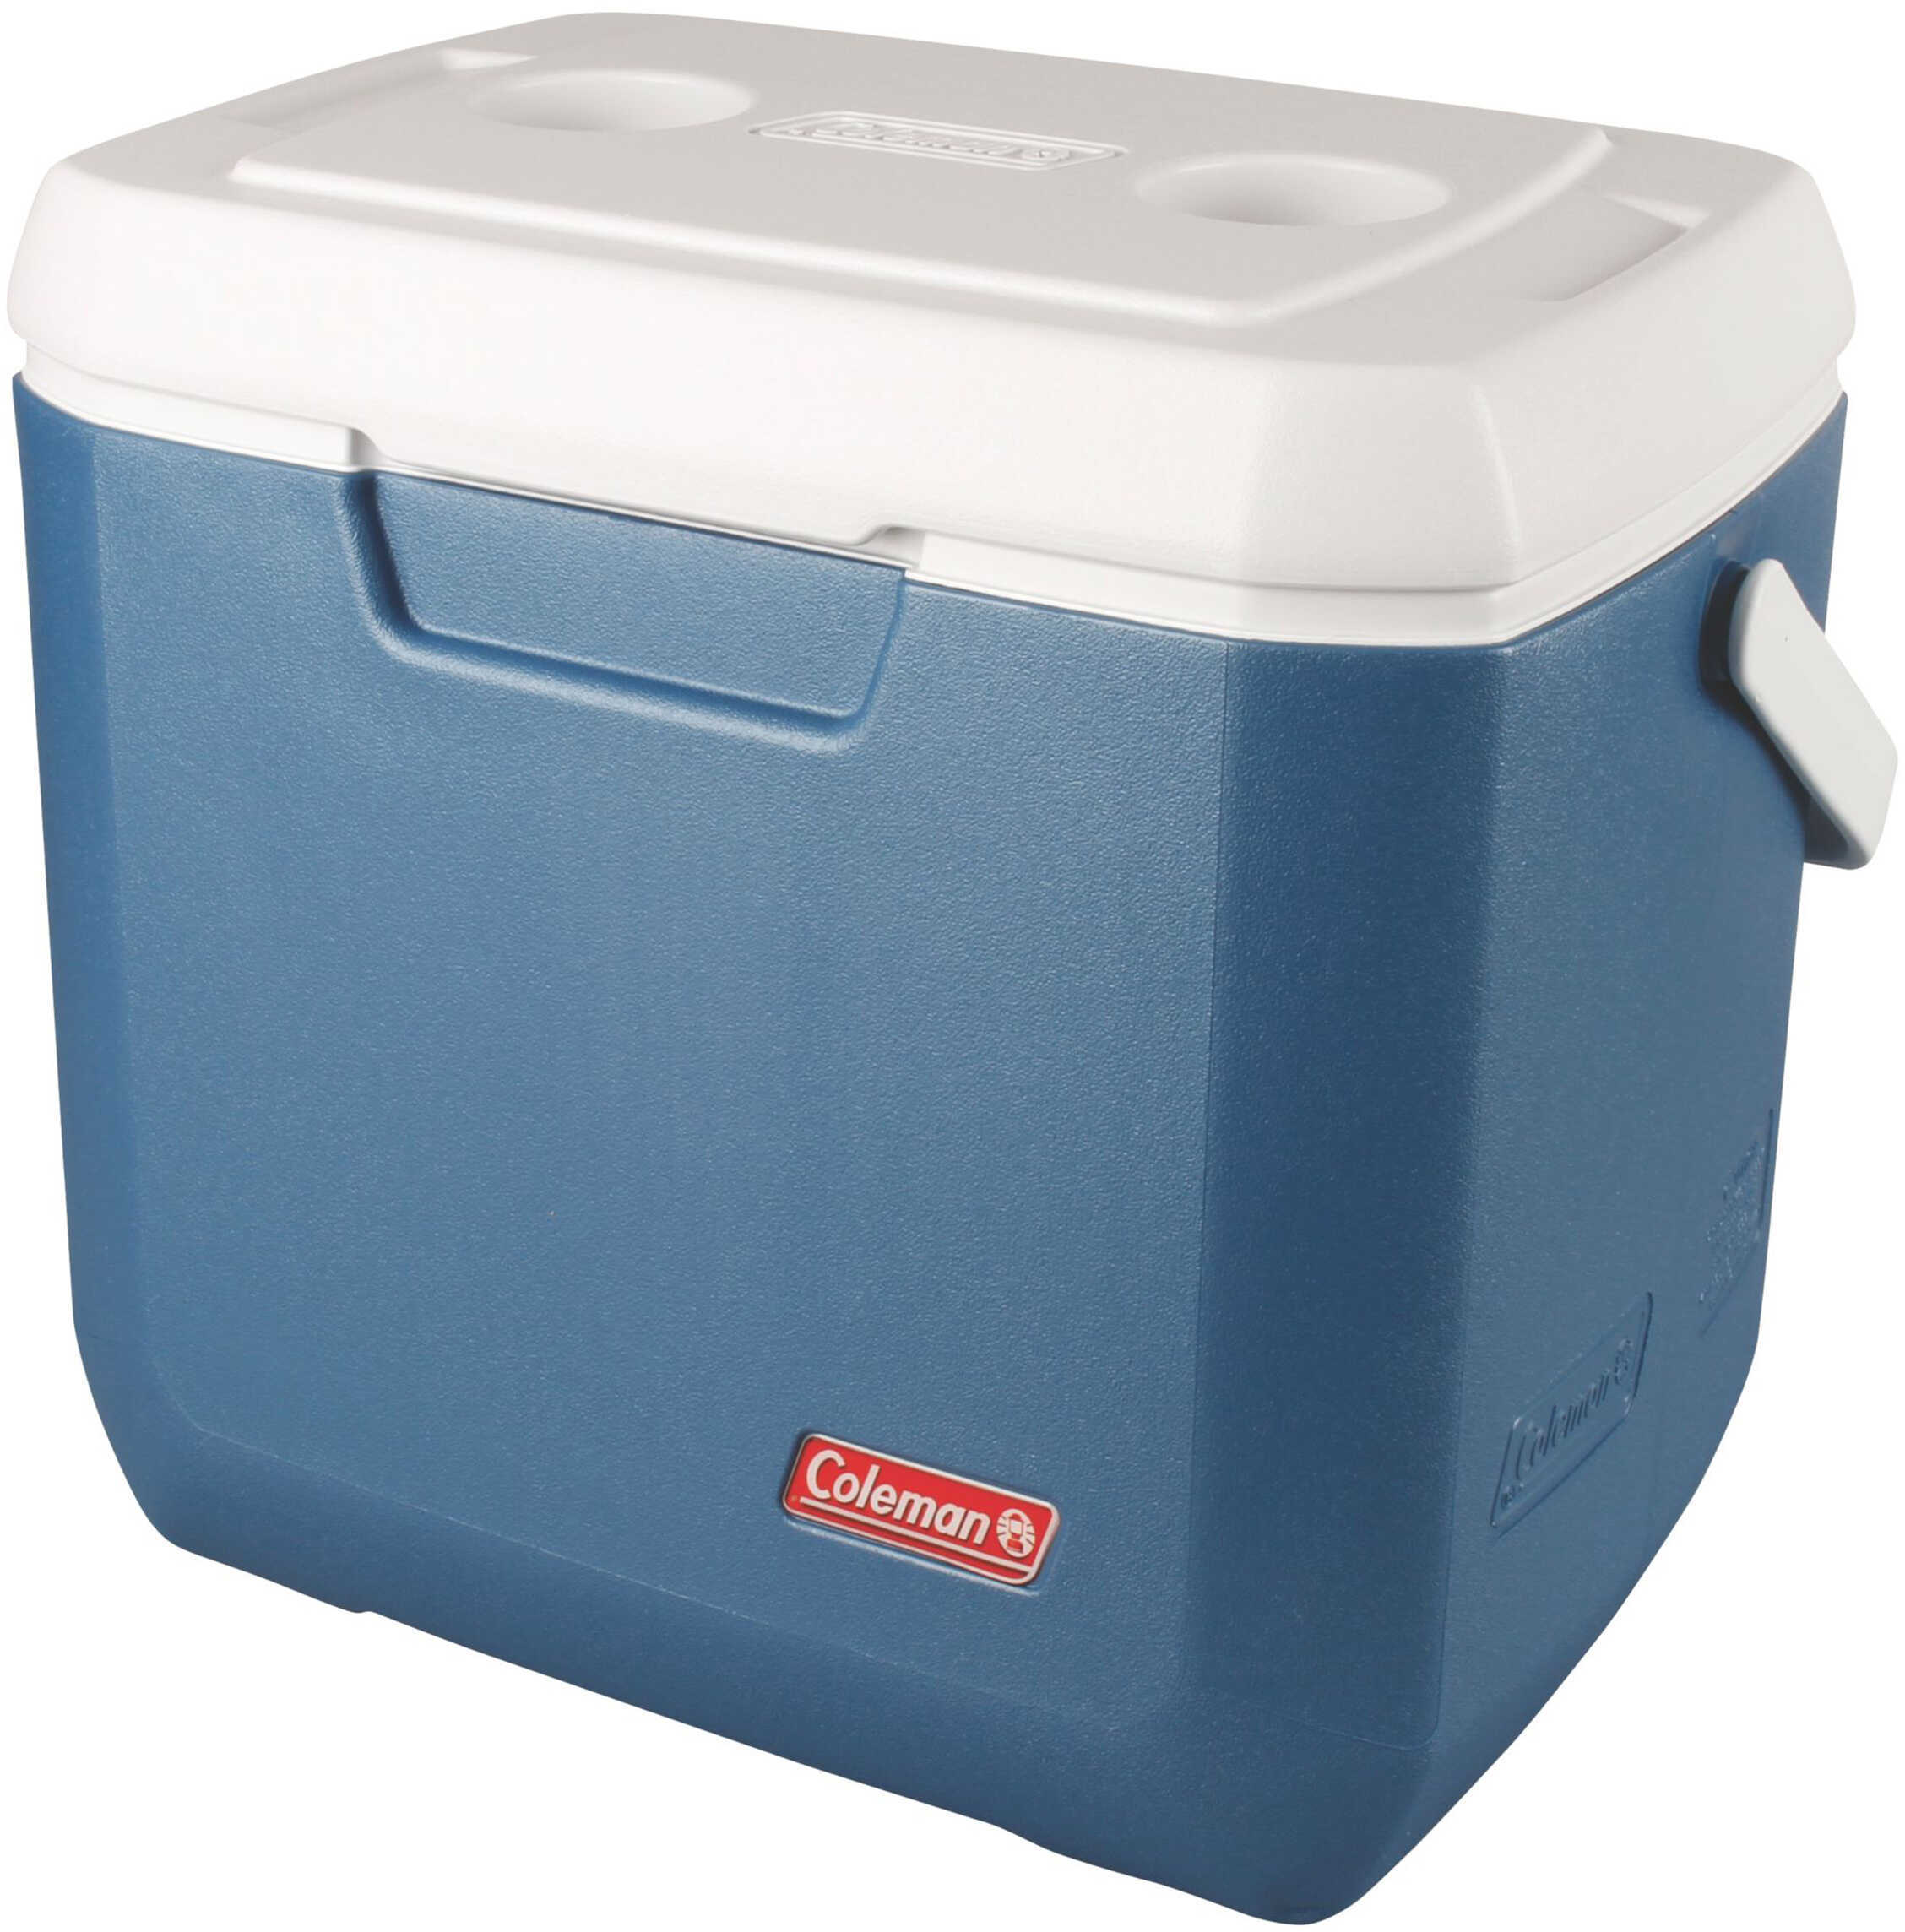 Coleman Cooler, 28 Quart Xtra, Blue Overmolded Handle Md: 3000002009